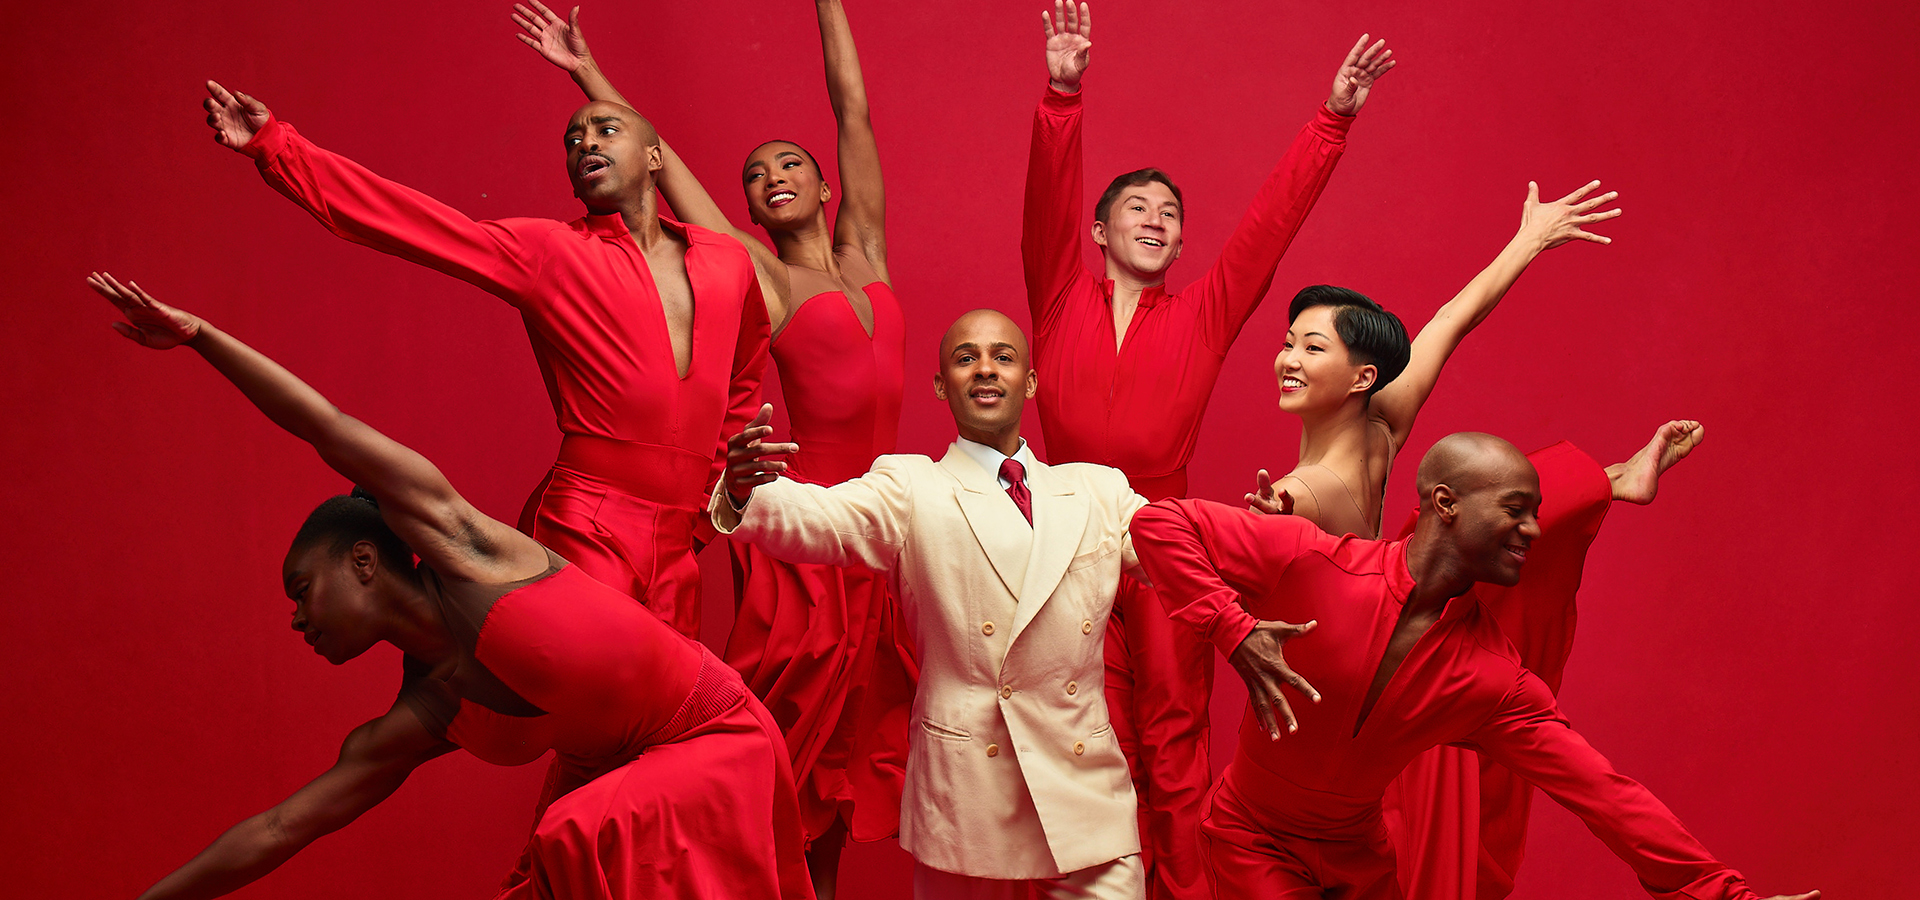 Ailey performers in red costumes with their arms raised surround a male dancer in a white suit posing in the center.